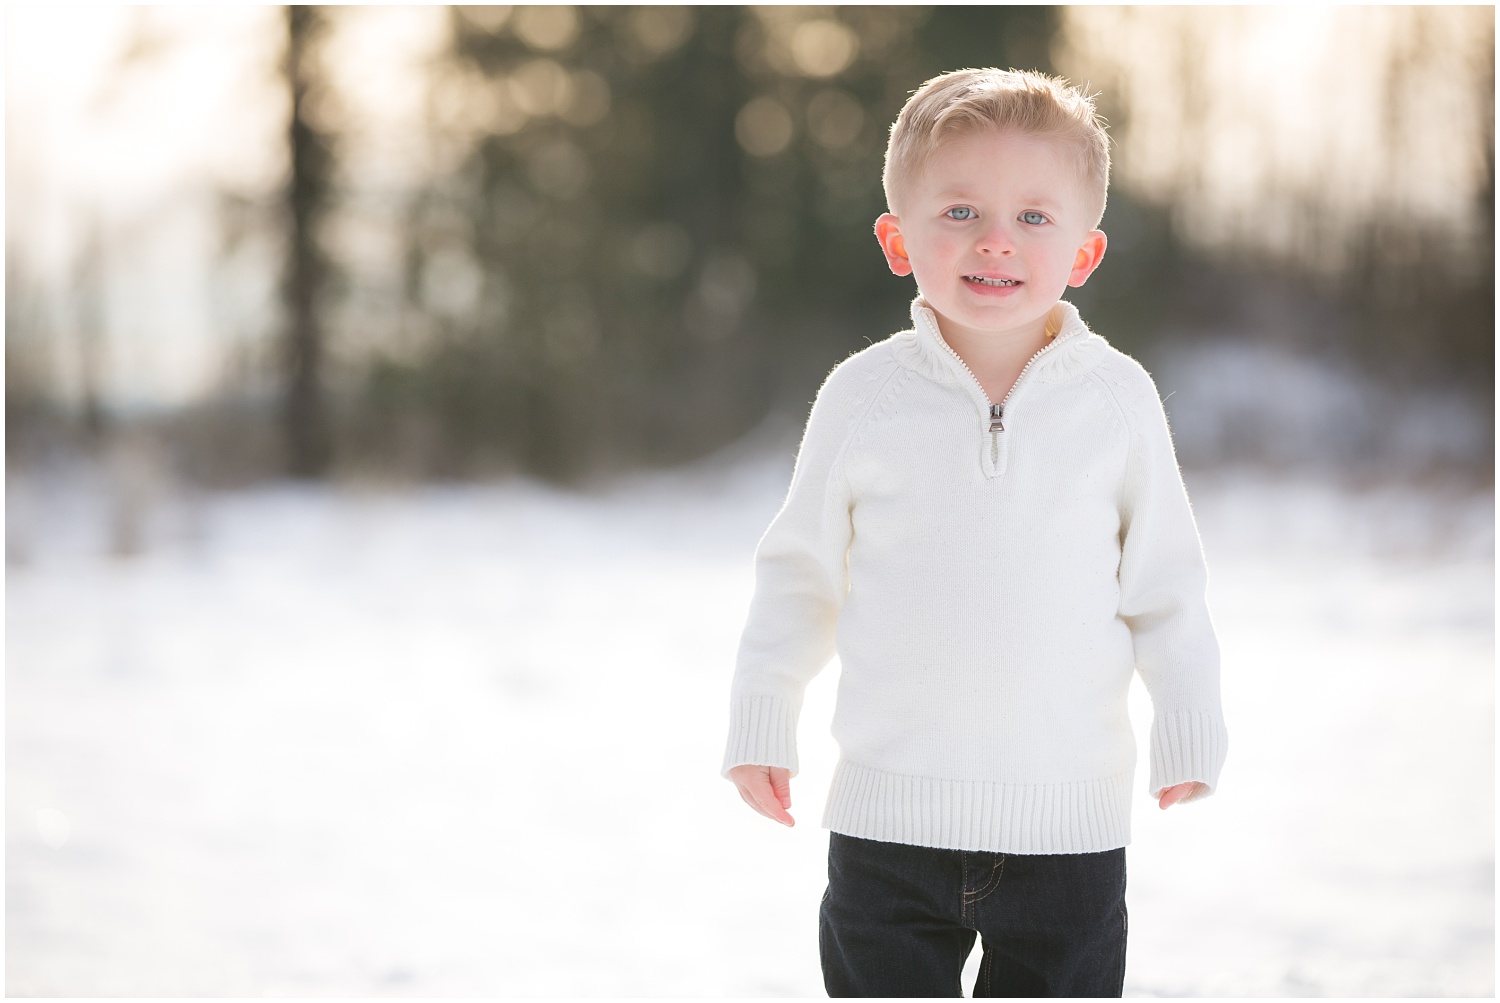 Amazing Day Photography - Langley Family Photographer - Derby Reach Family Session (2).jpg